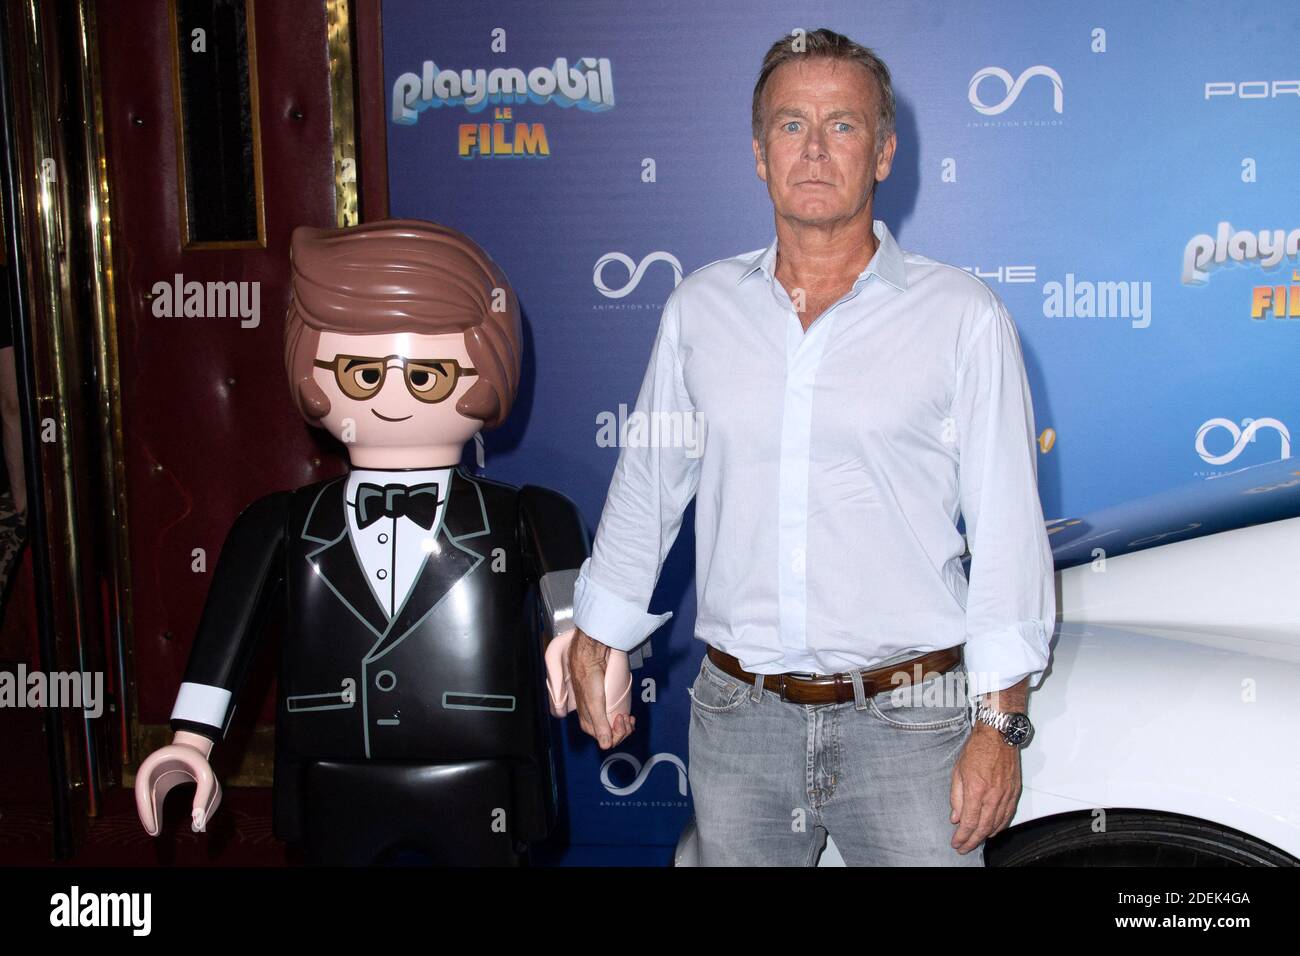 Franck Dubosc attending the Playmobil Le Film Premiere at the Grand Rex  cinema in Paris, France on June 23, 2019. Photo by Aurore  Marechal/ABACAPRESS.COM Stock Photo - Alamy